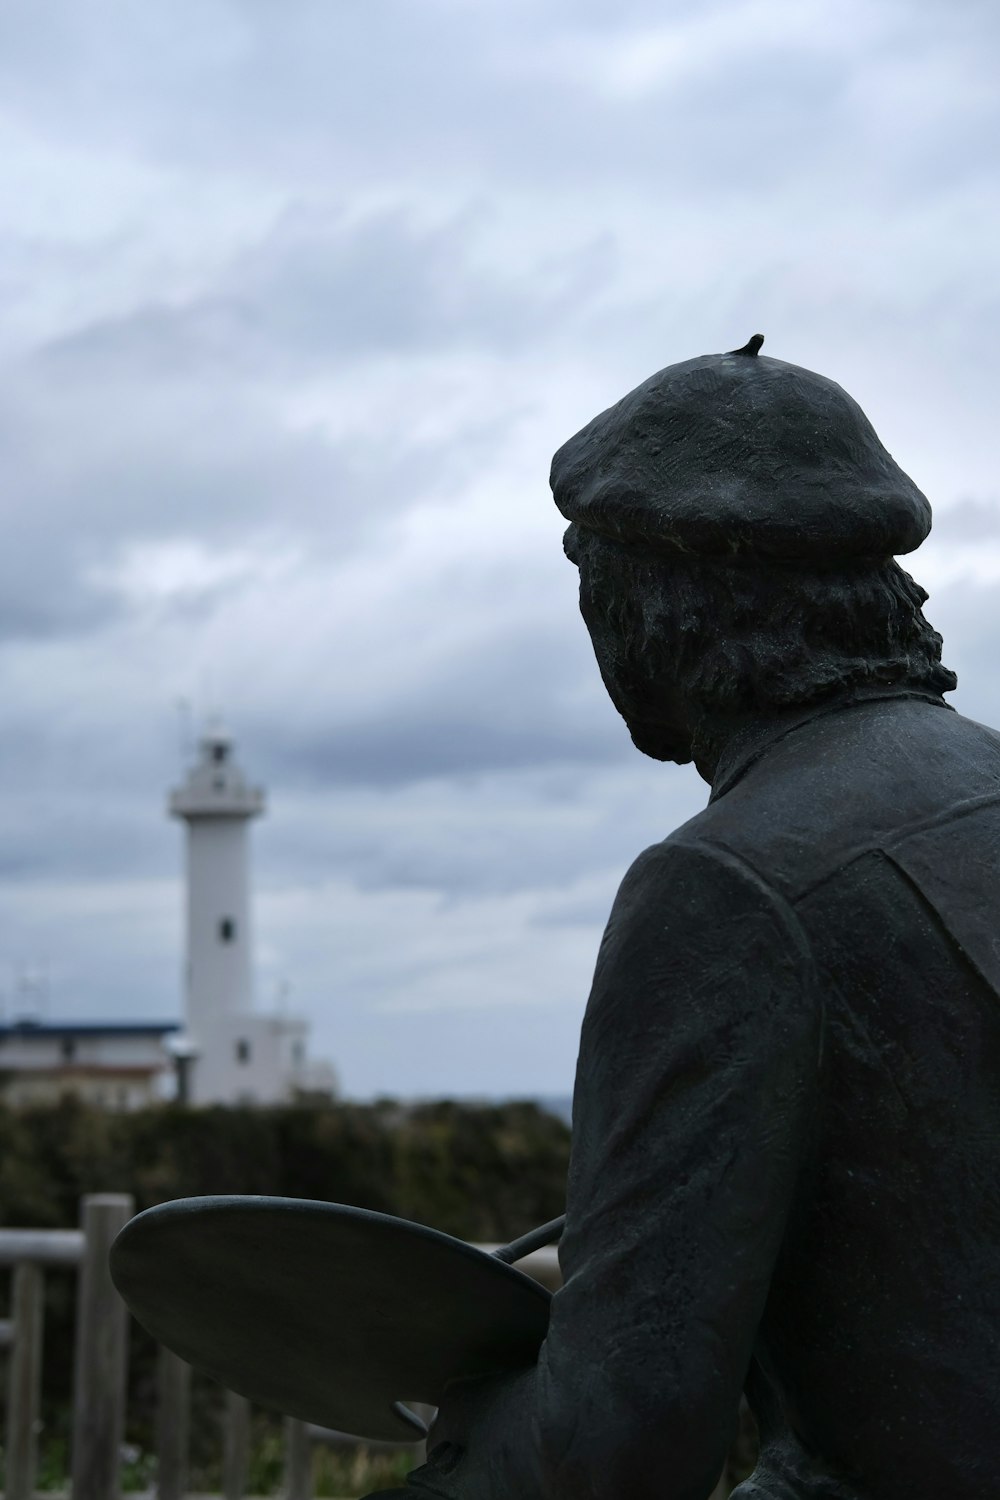 a statue of a man holding a surfboard in front of a lighthouse